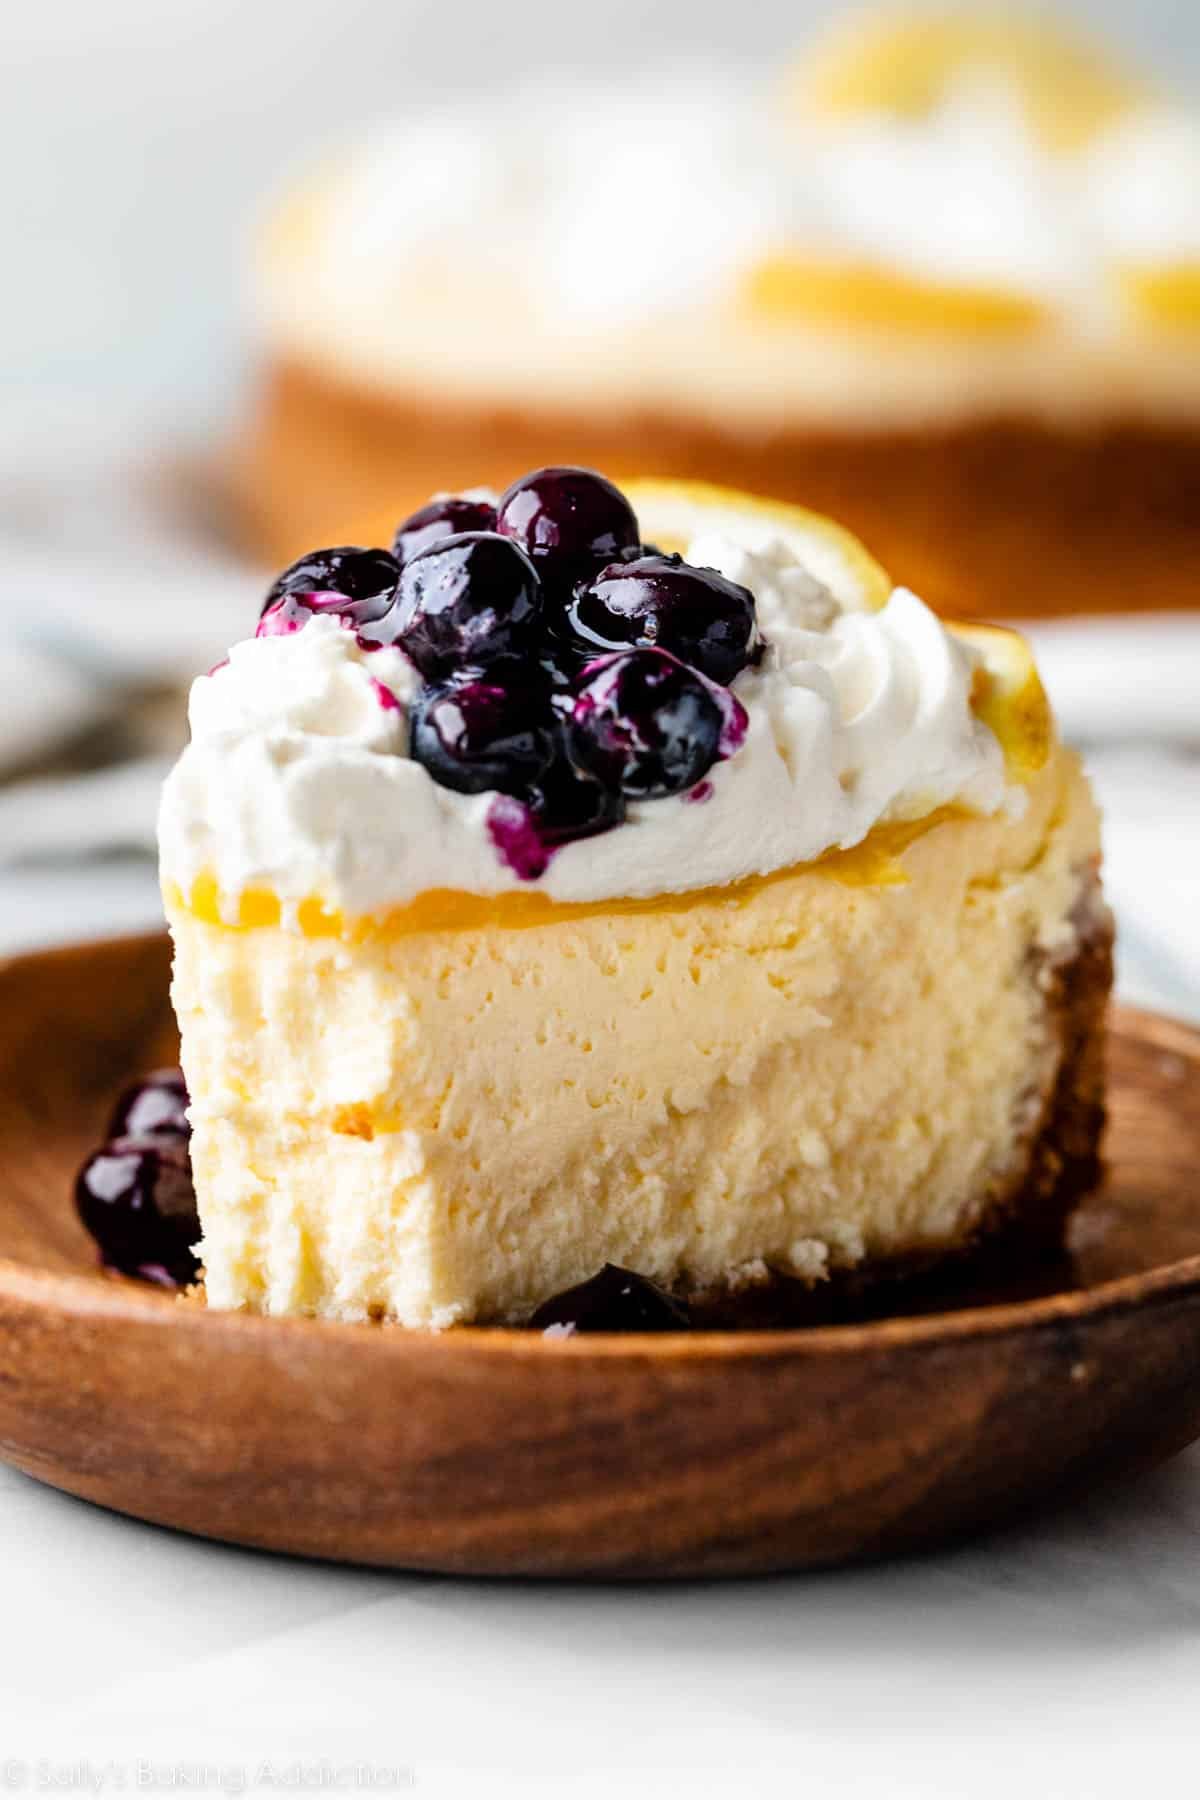 lemon cheesecake with whipped cream and blueberry sauce on top